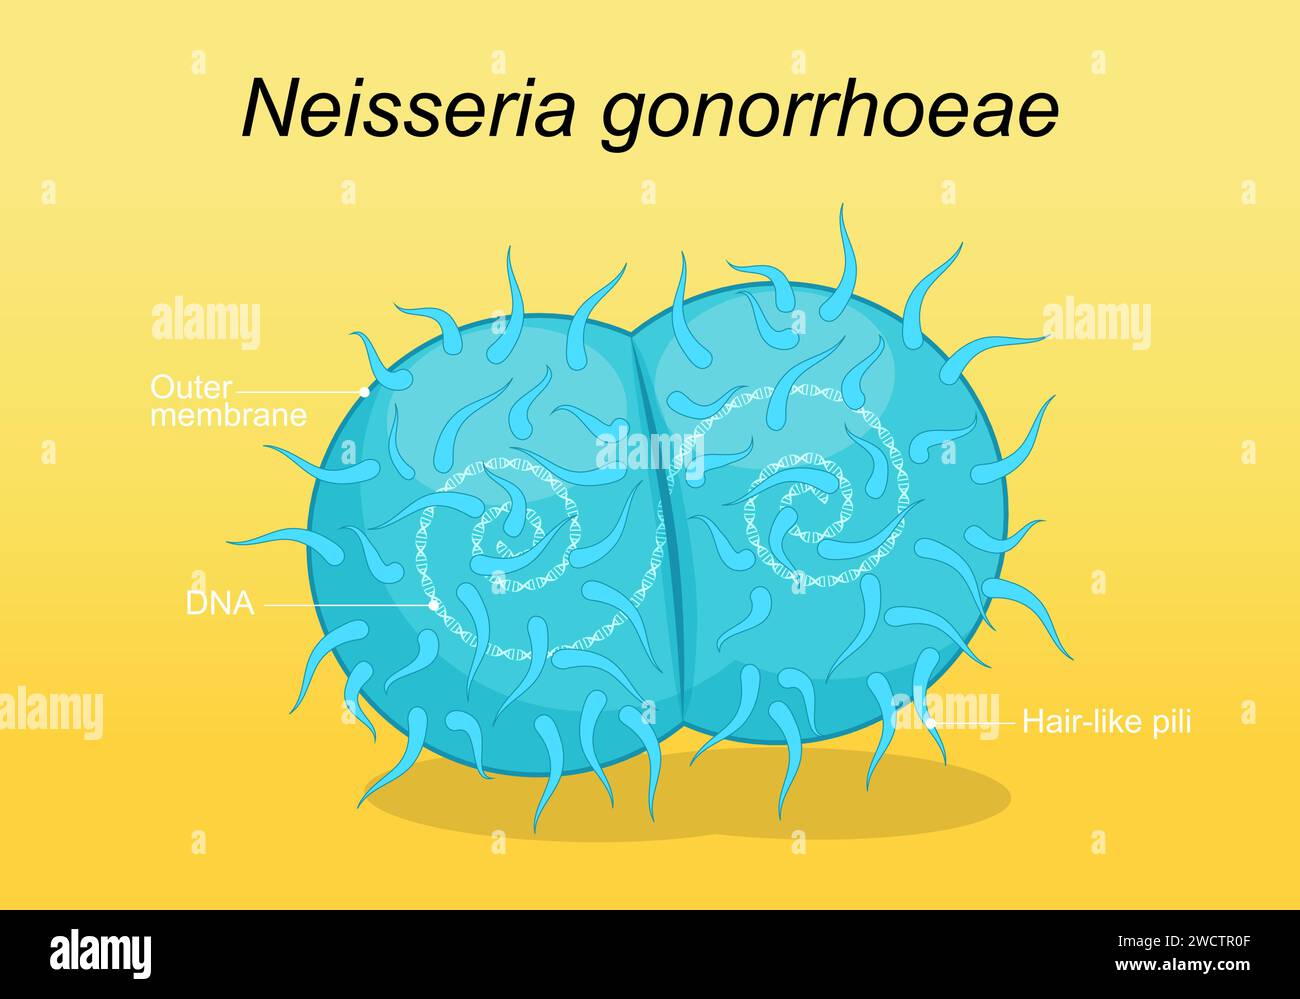 Neisseria gonorrhoeae pathogen bacteria. Sexually transmitted disease and gonococcus infection. Genital tract infection. Vector poster Stock Vector